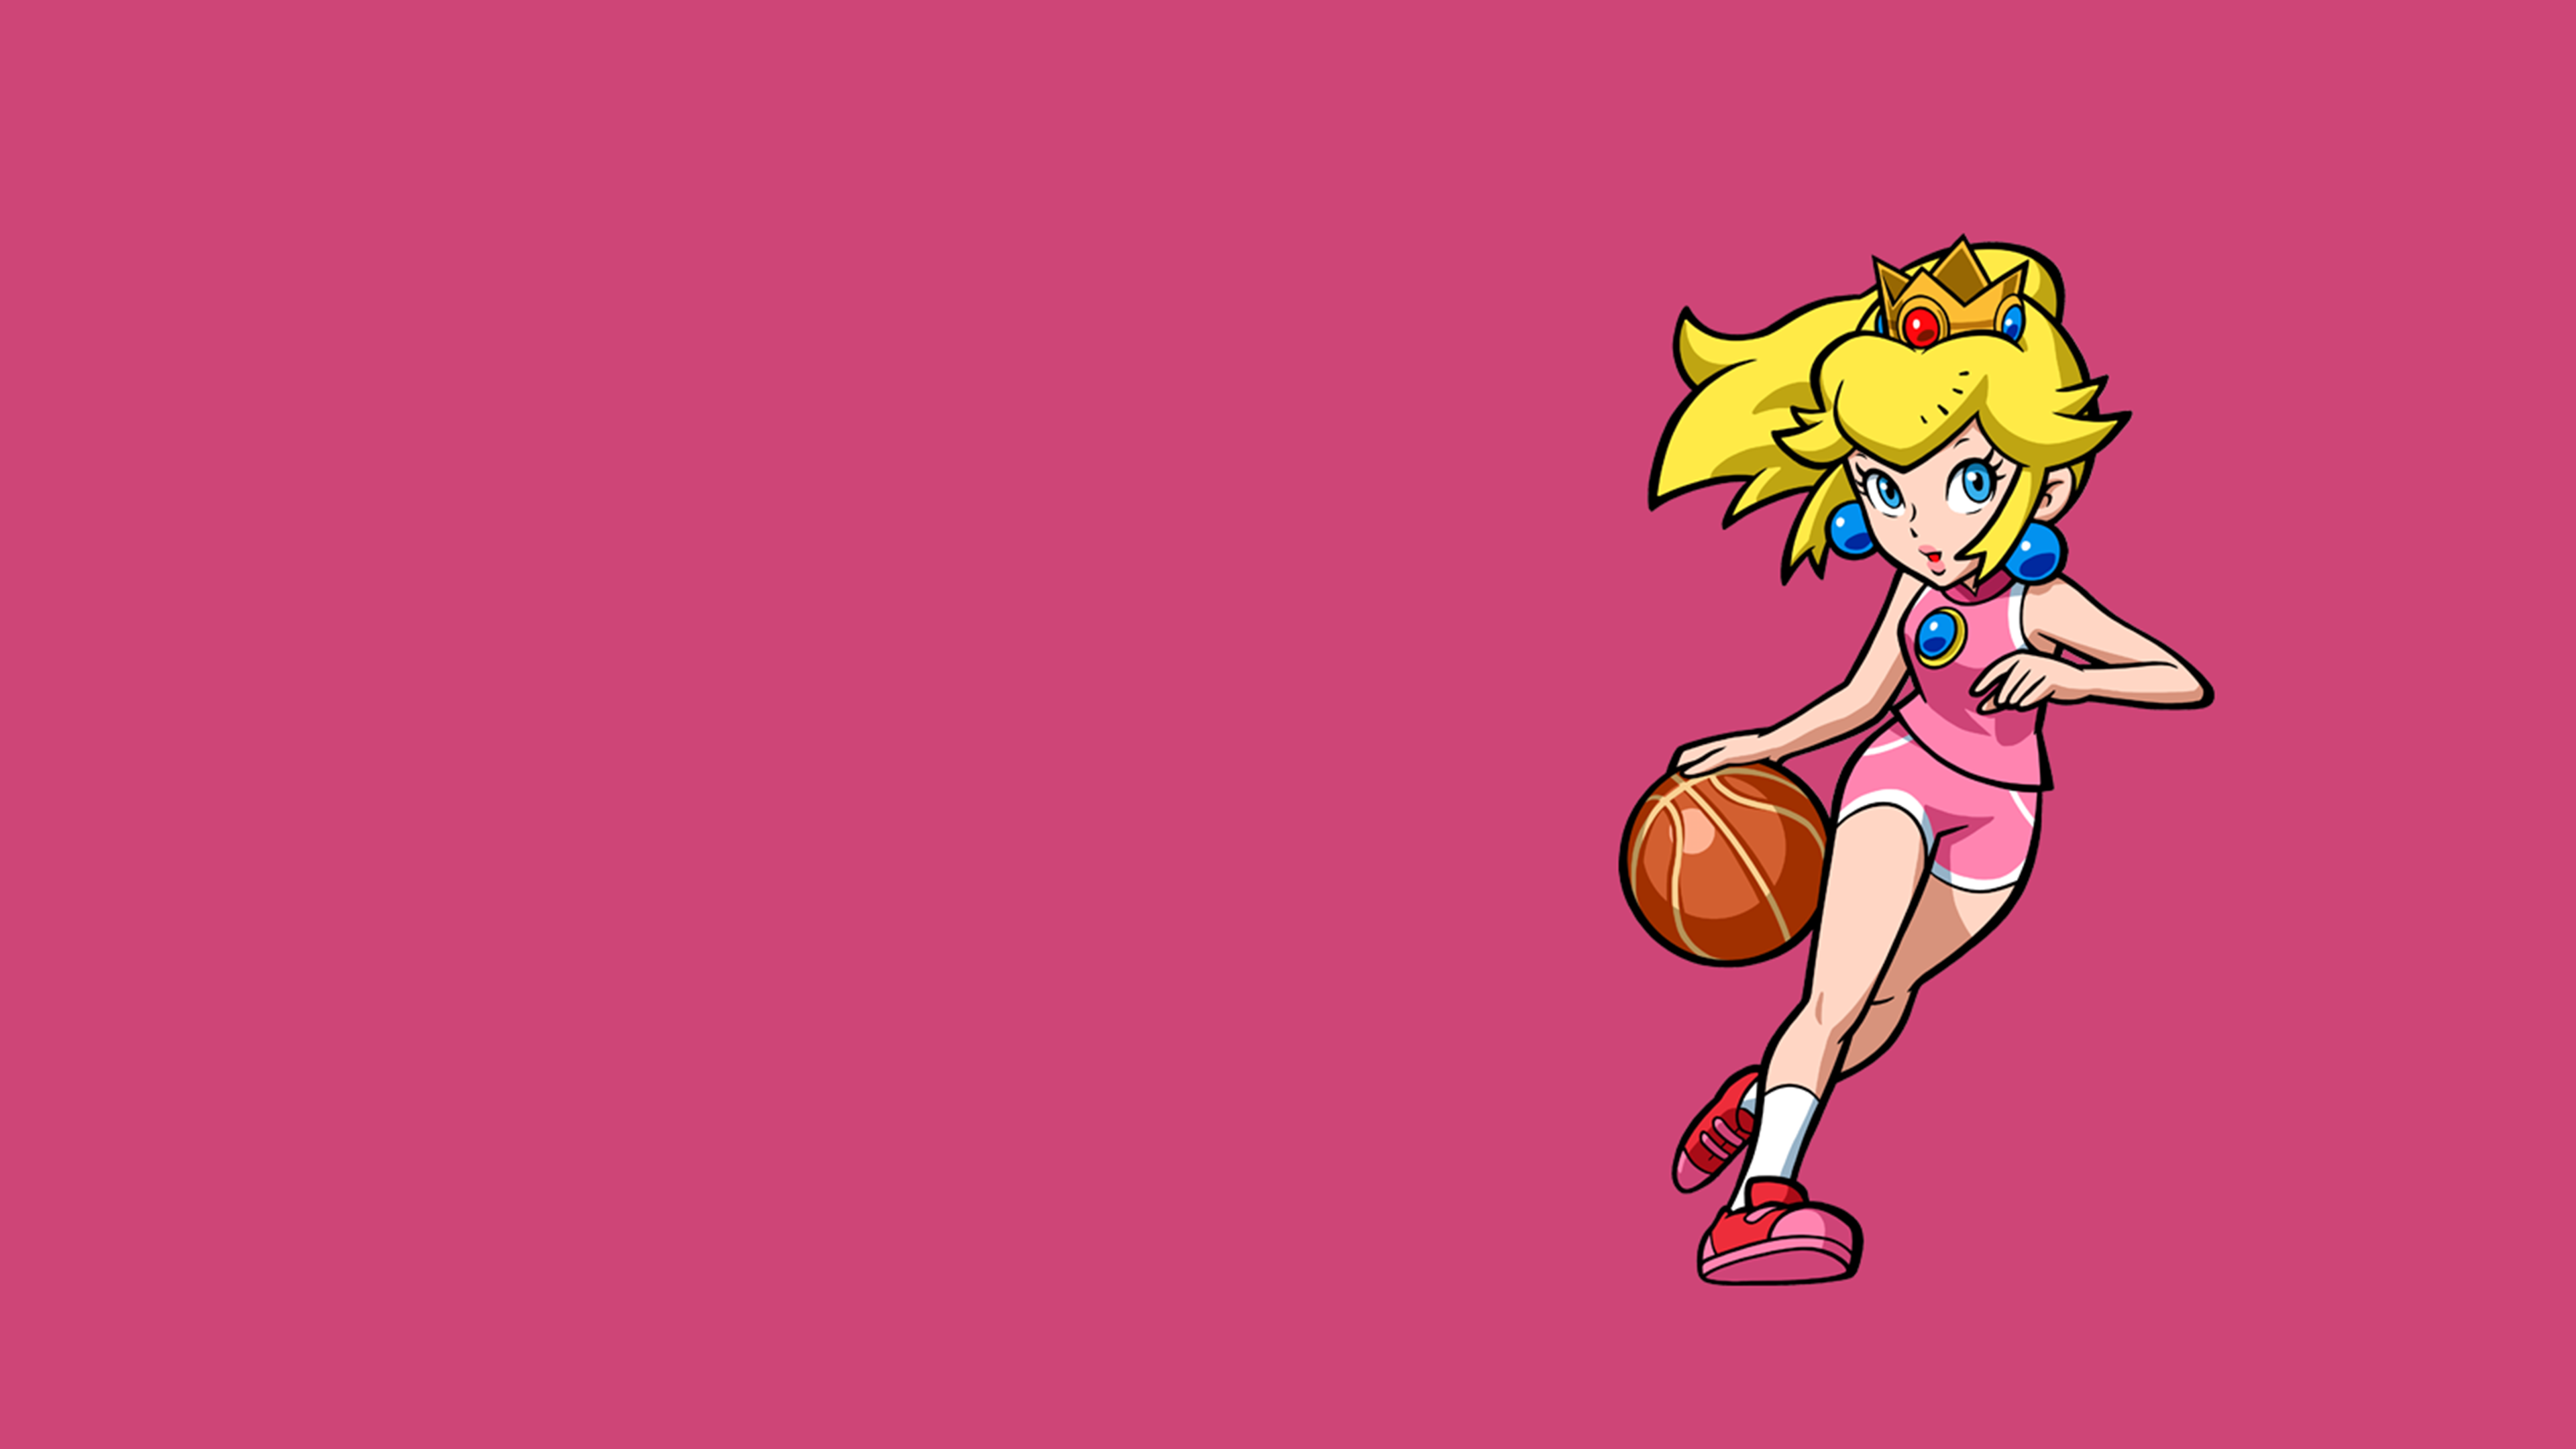 General 3840x2160 Super Mario Nintendo Princess Peach sport pink background simple background blonde basketball pink clothing video game girls video game characters